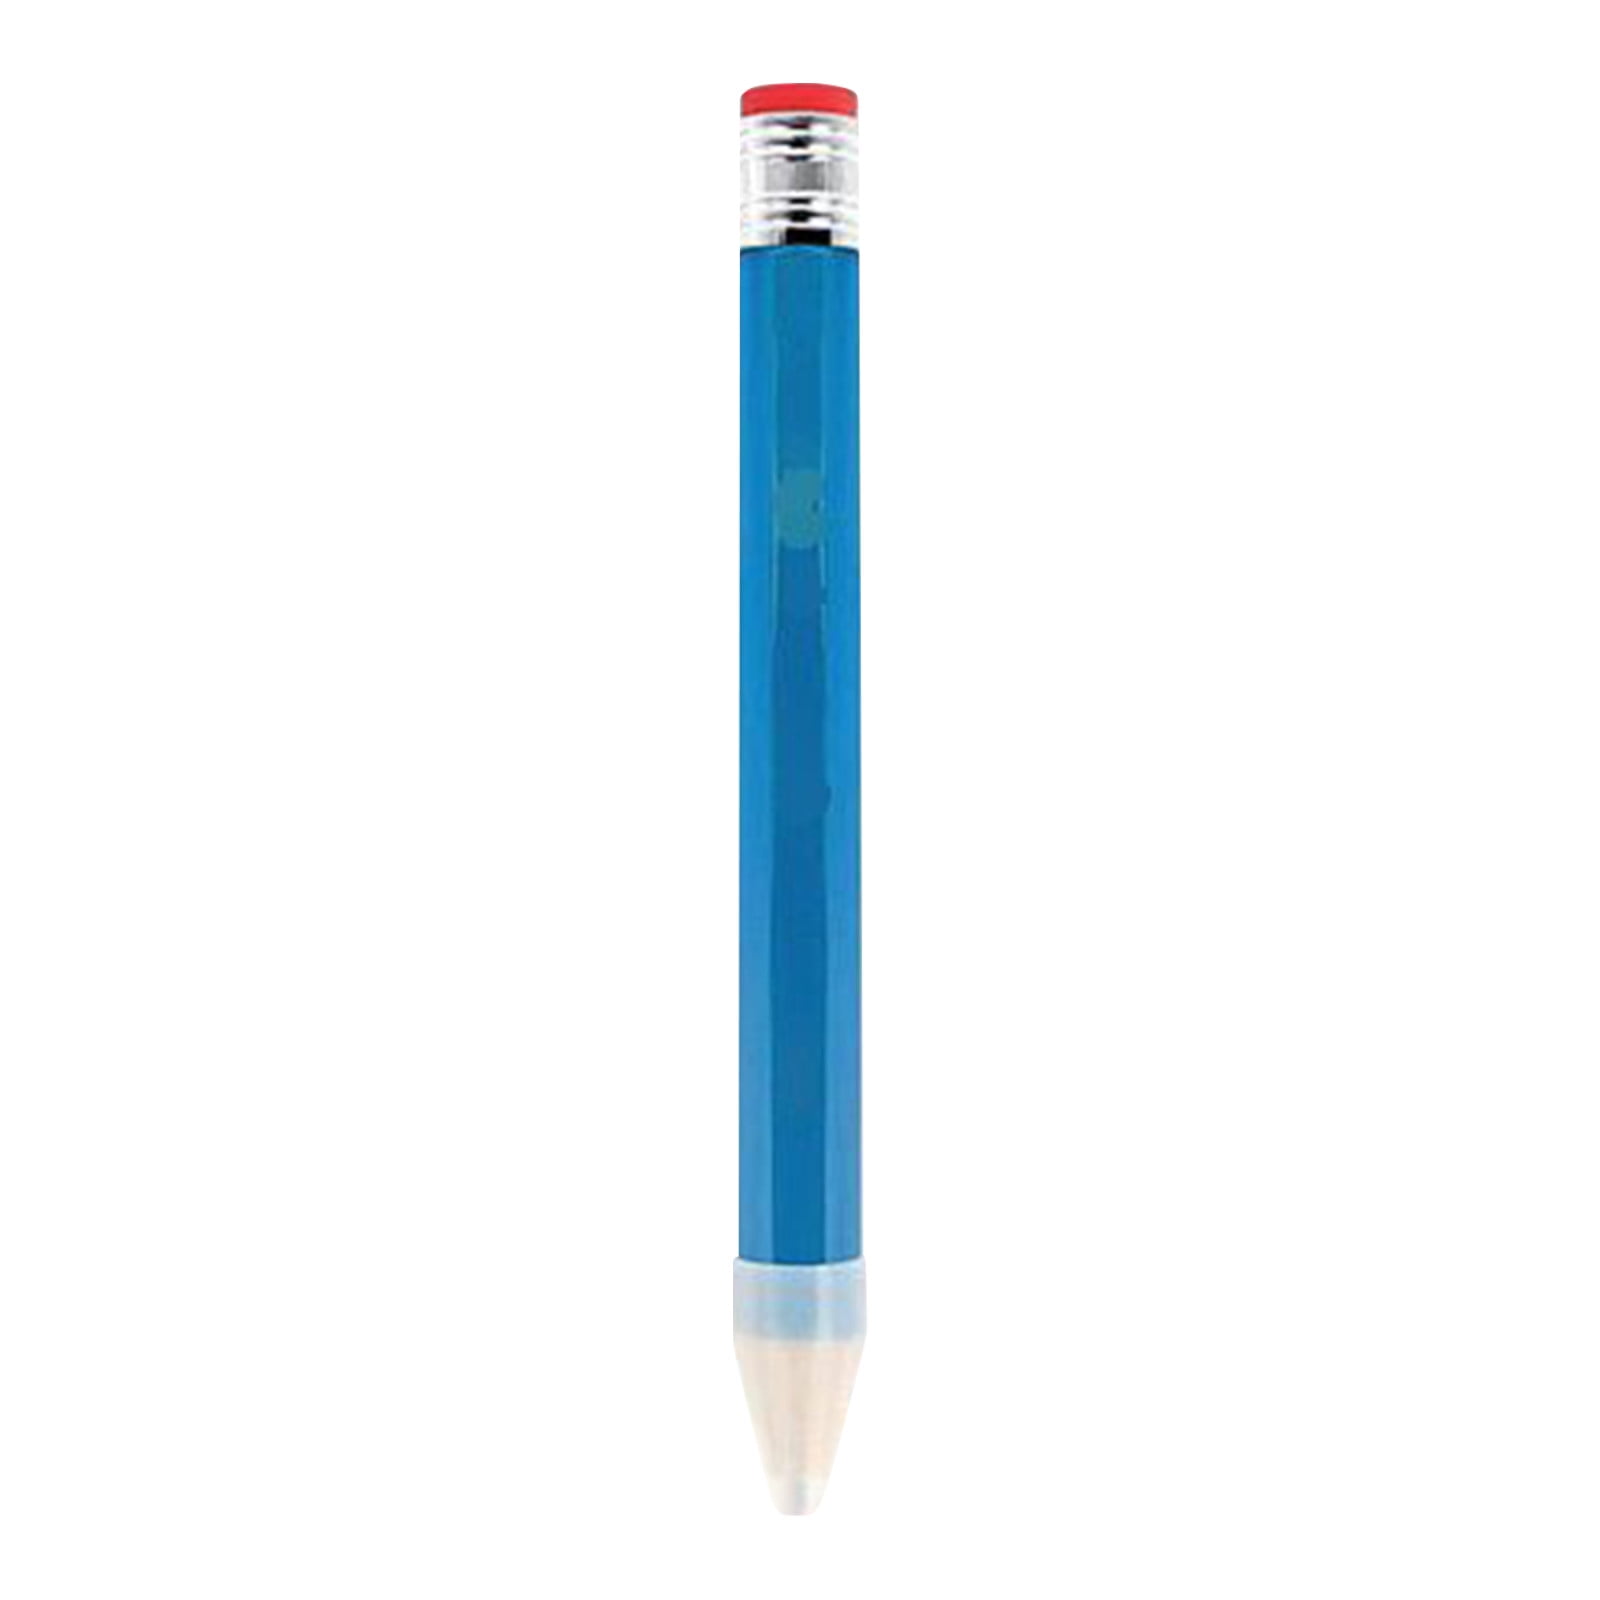 Personalized Imprinted Neon Round Pencils in Bulk from Pencil Guy Shop